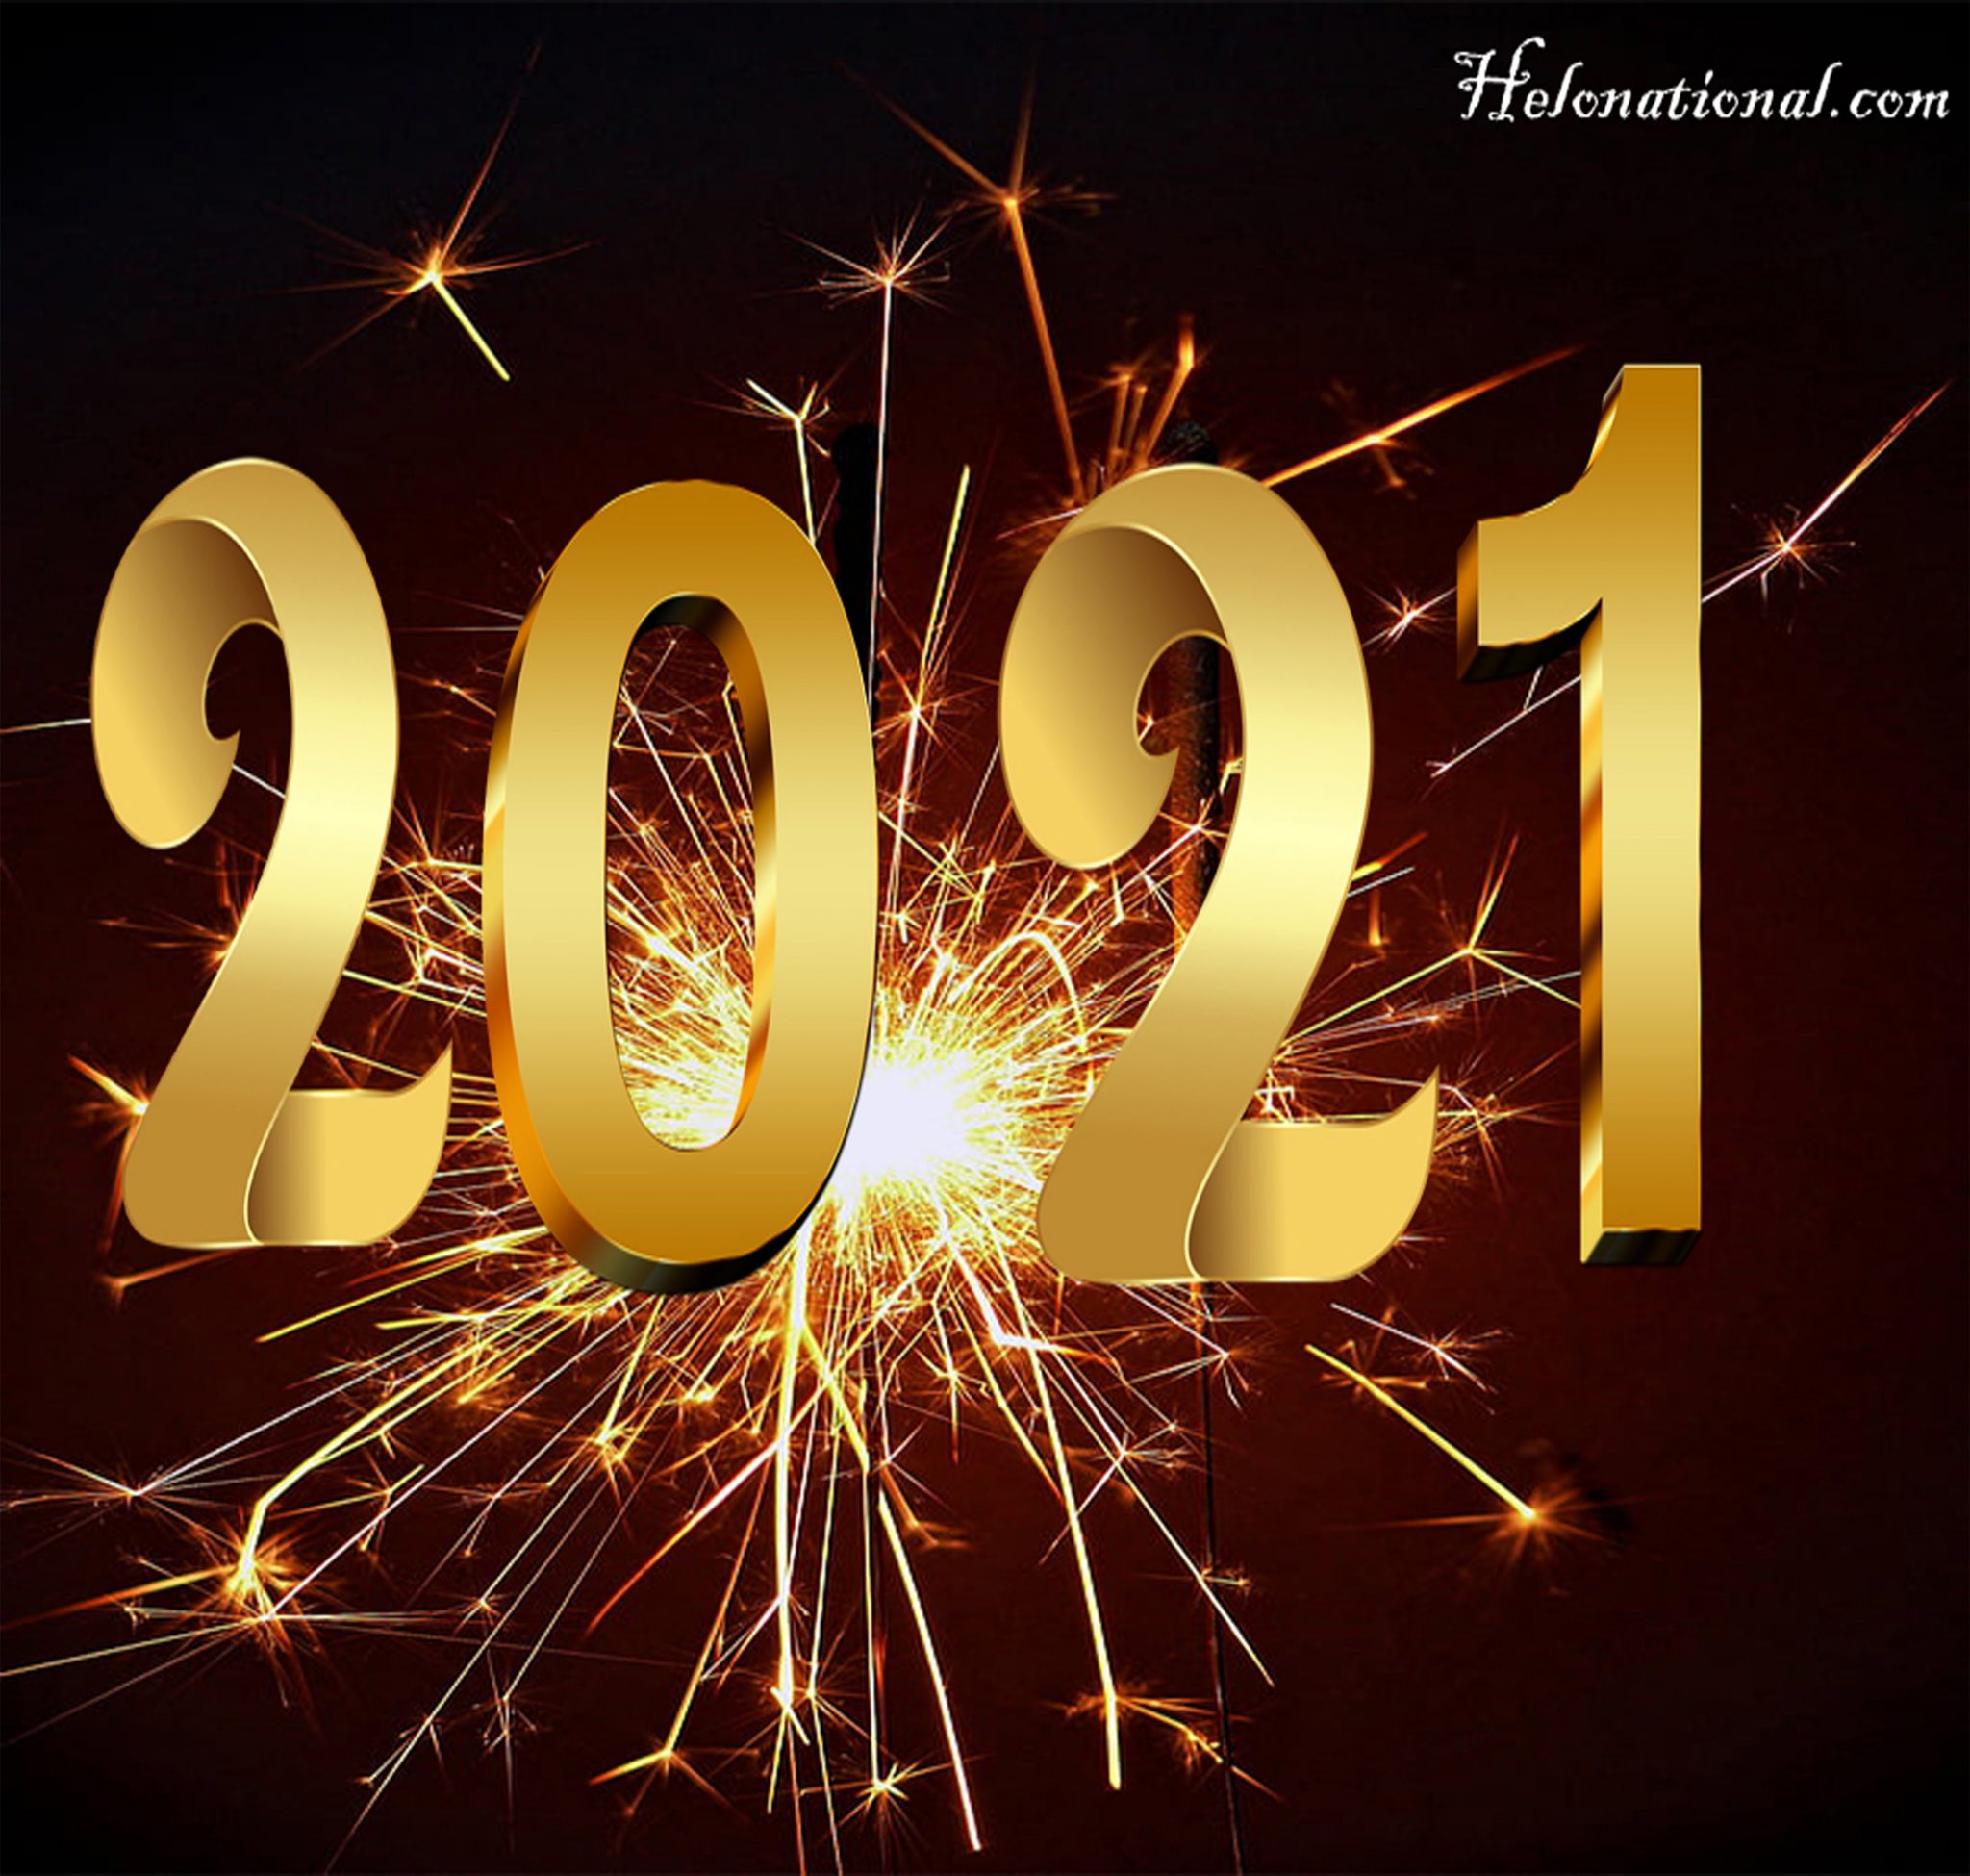 Happy New Year 2021 Hd Images Helo National